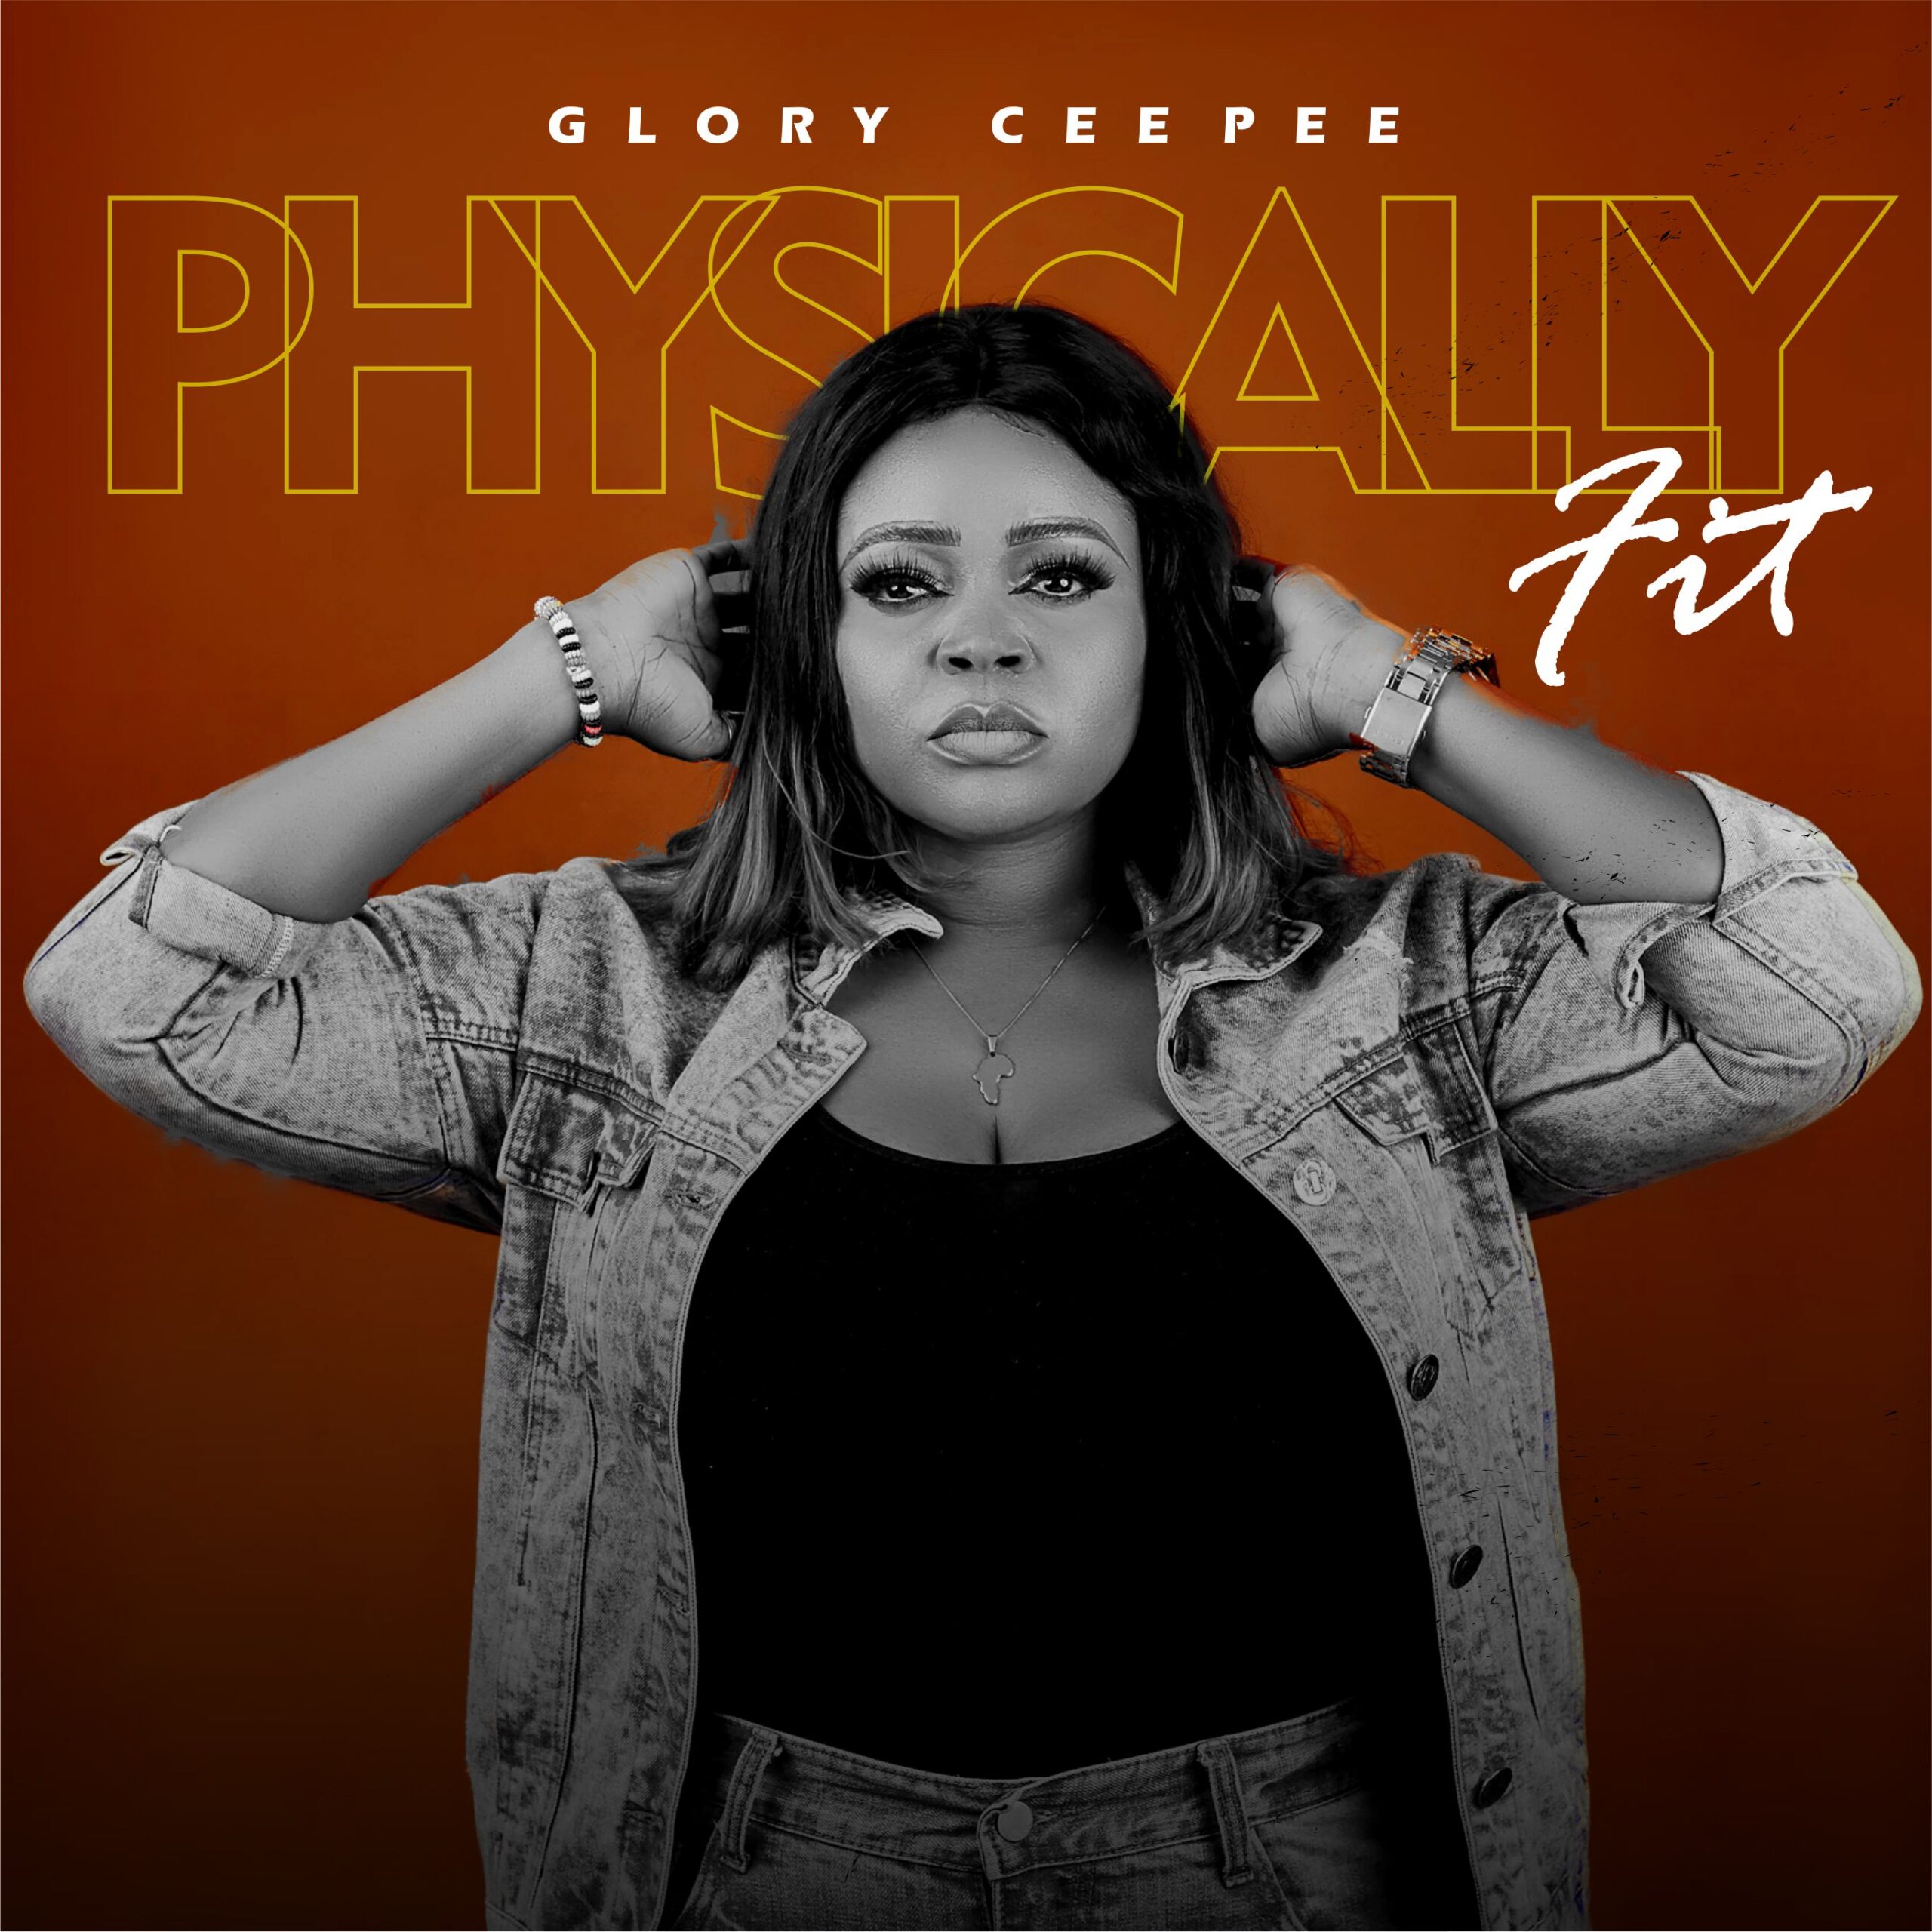 Music: Physically Fit – Glory Ceepee